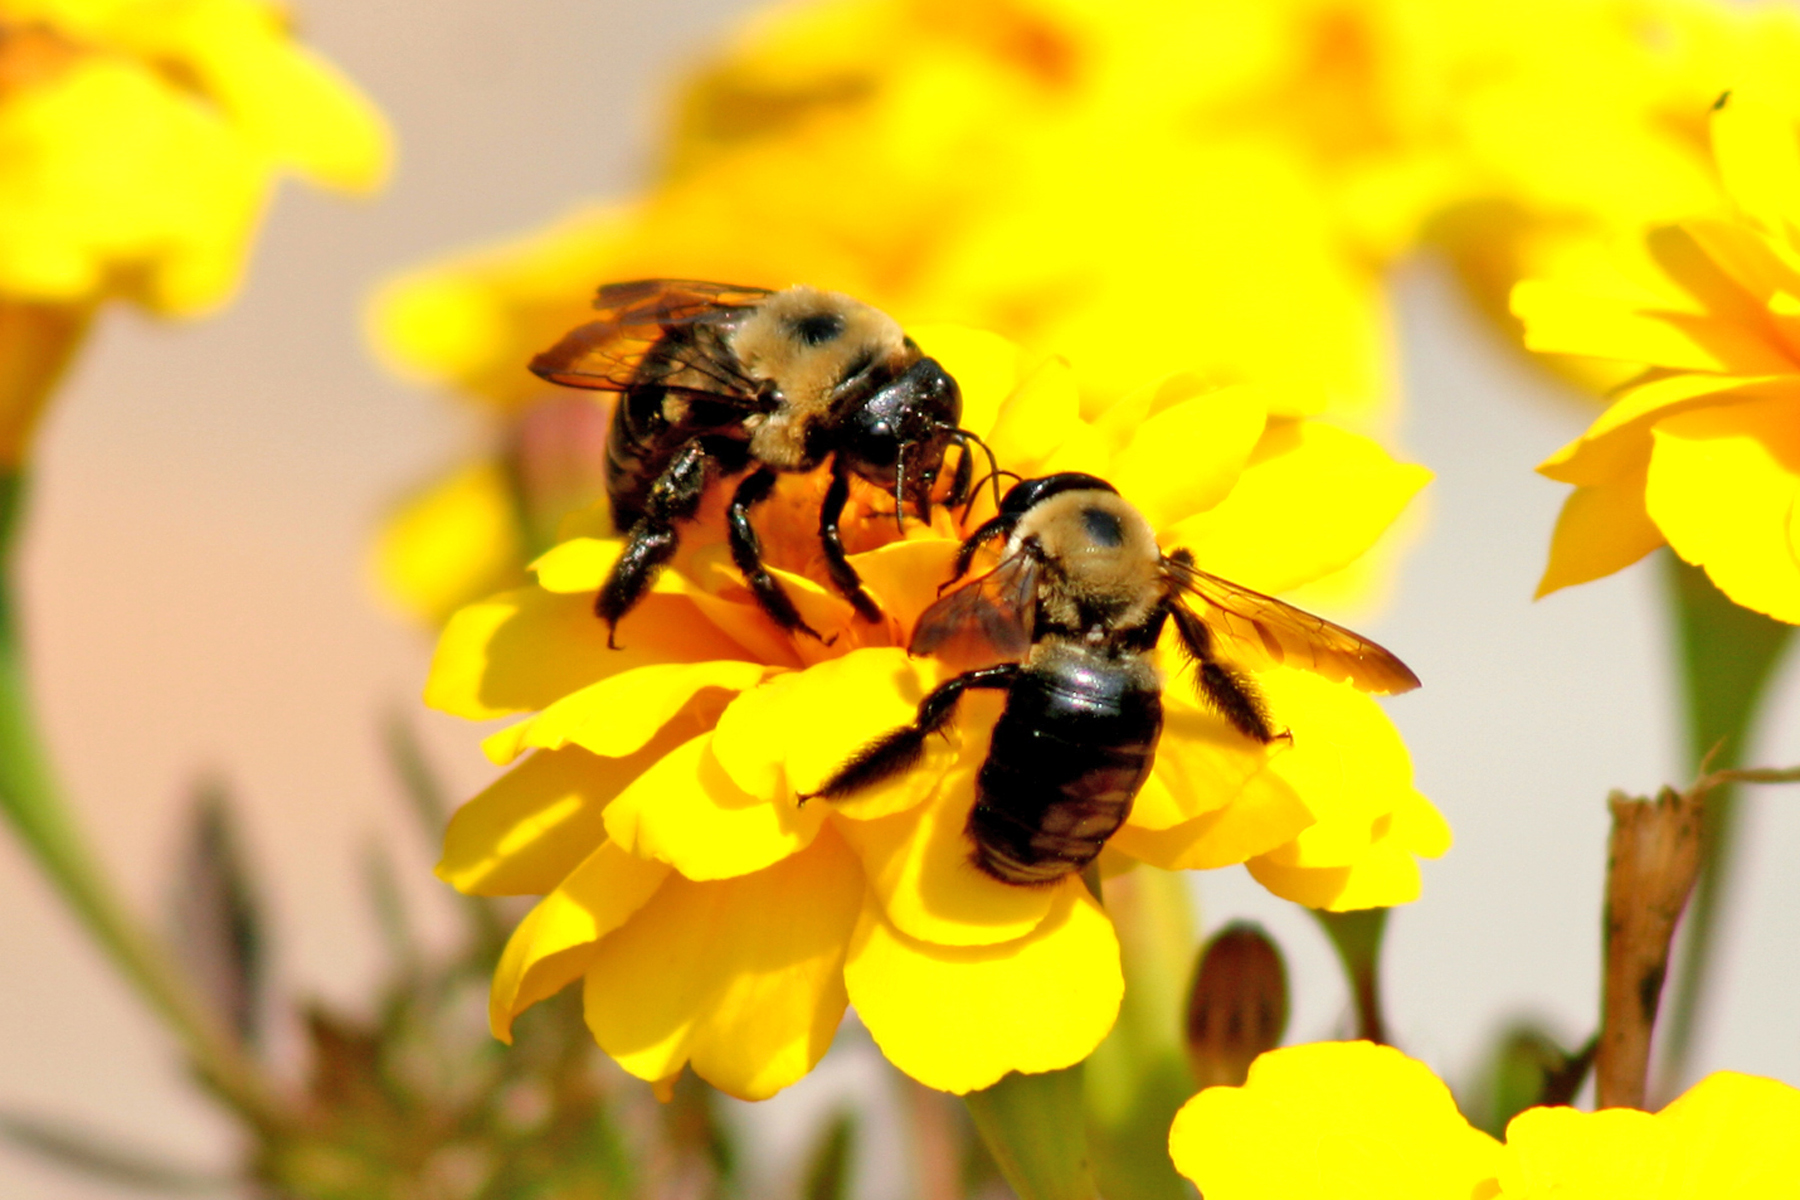 Twin Bees (user submitted)